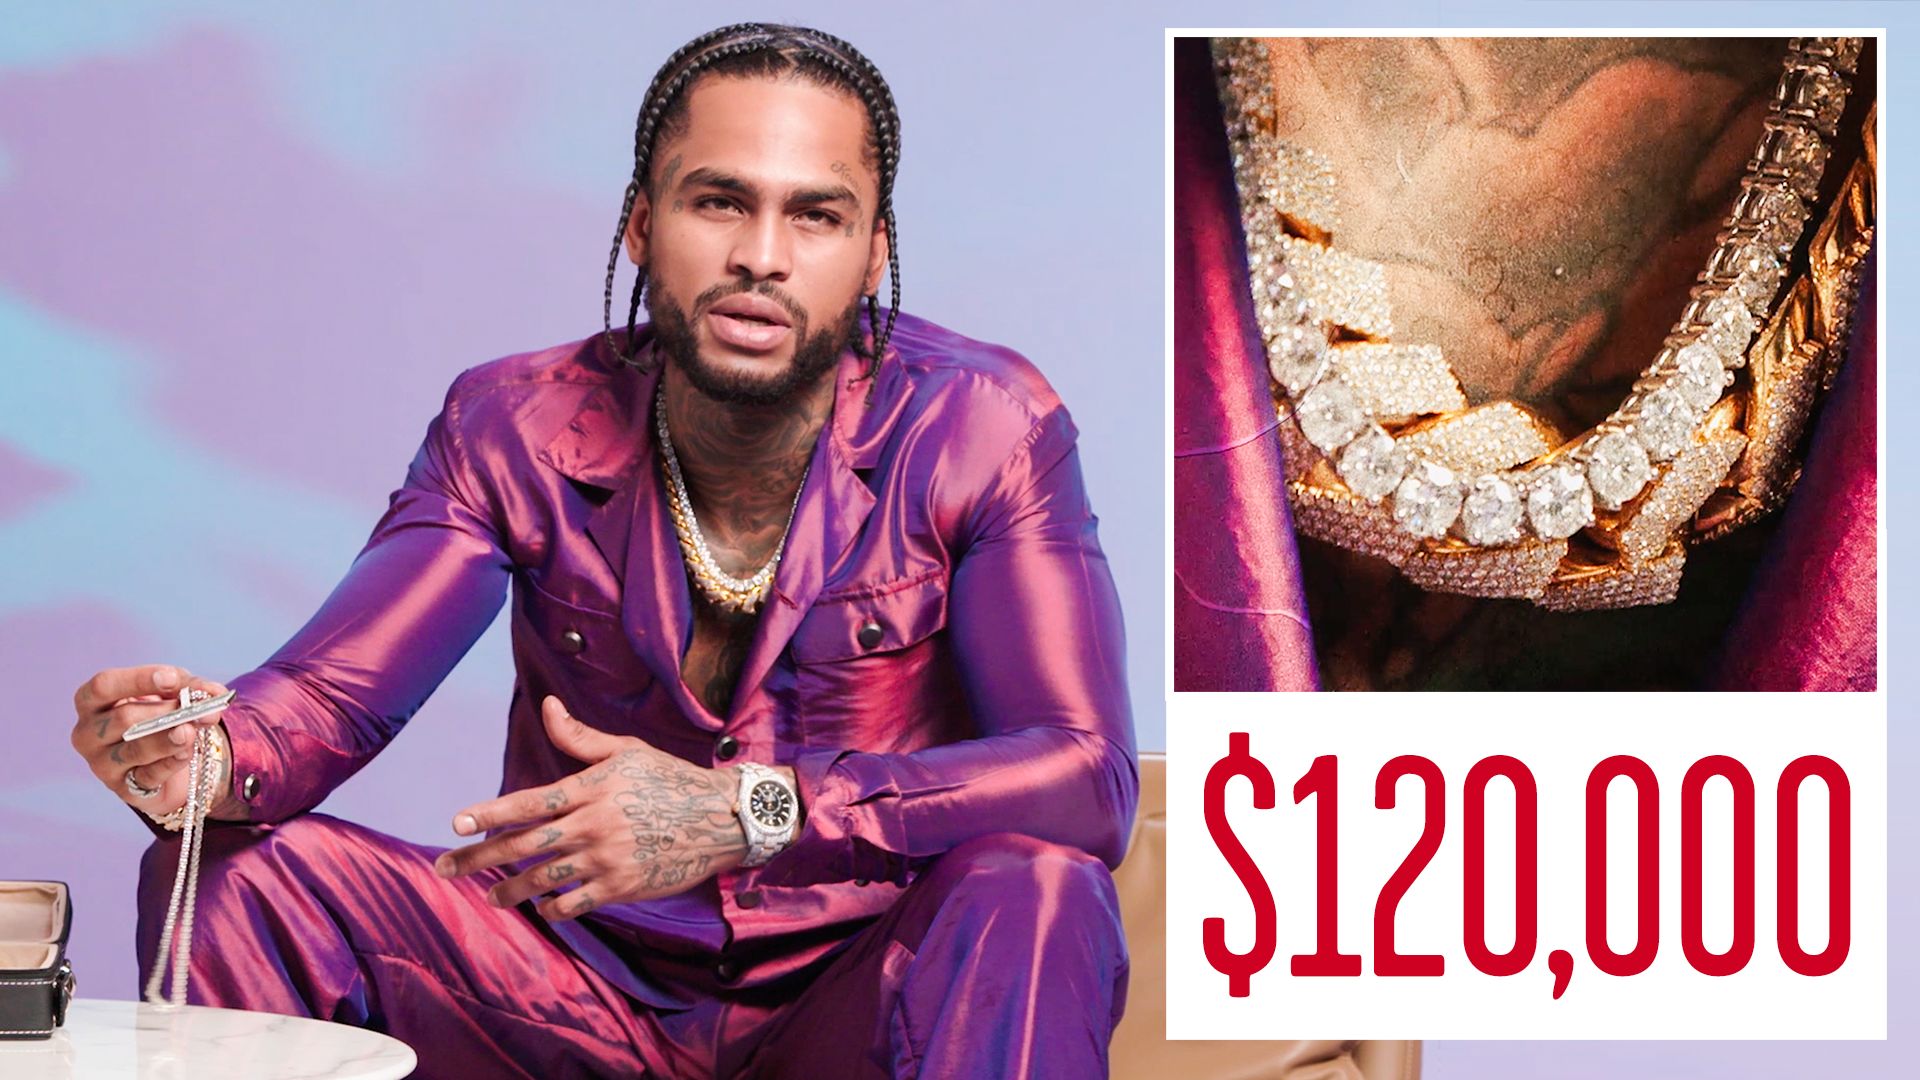 gq on the rocks dave east shows off his insane jewelry collection